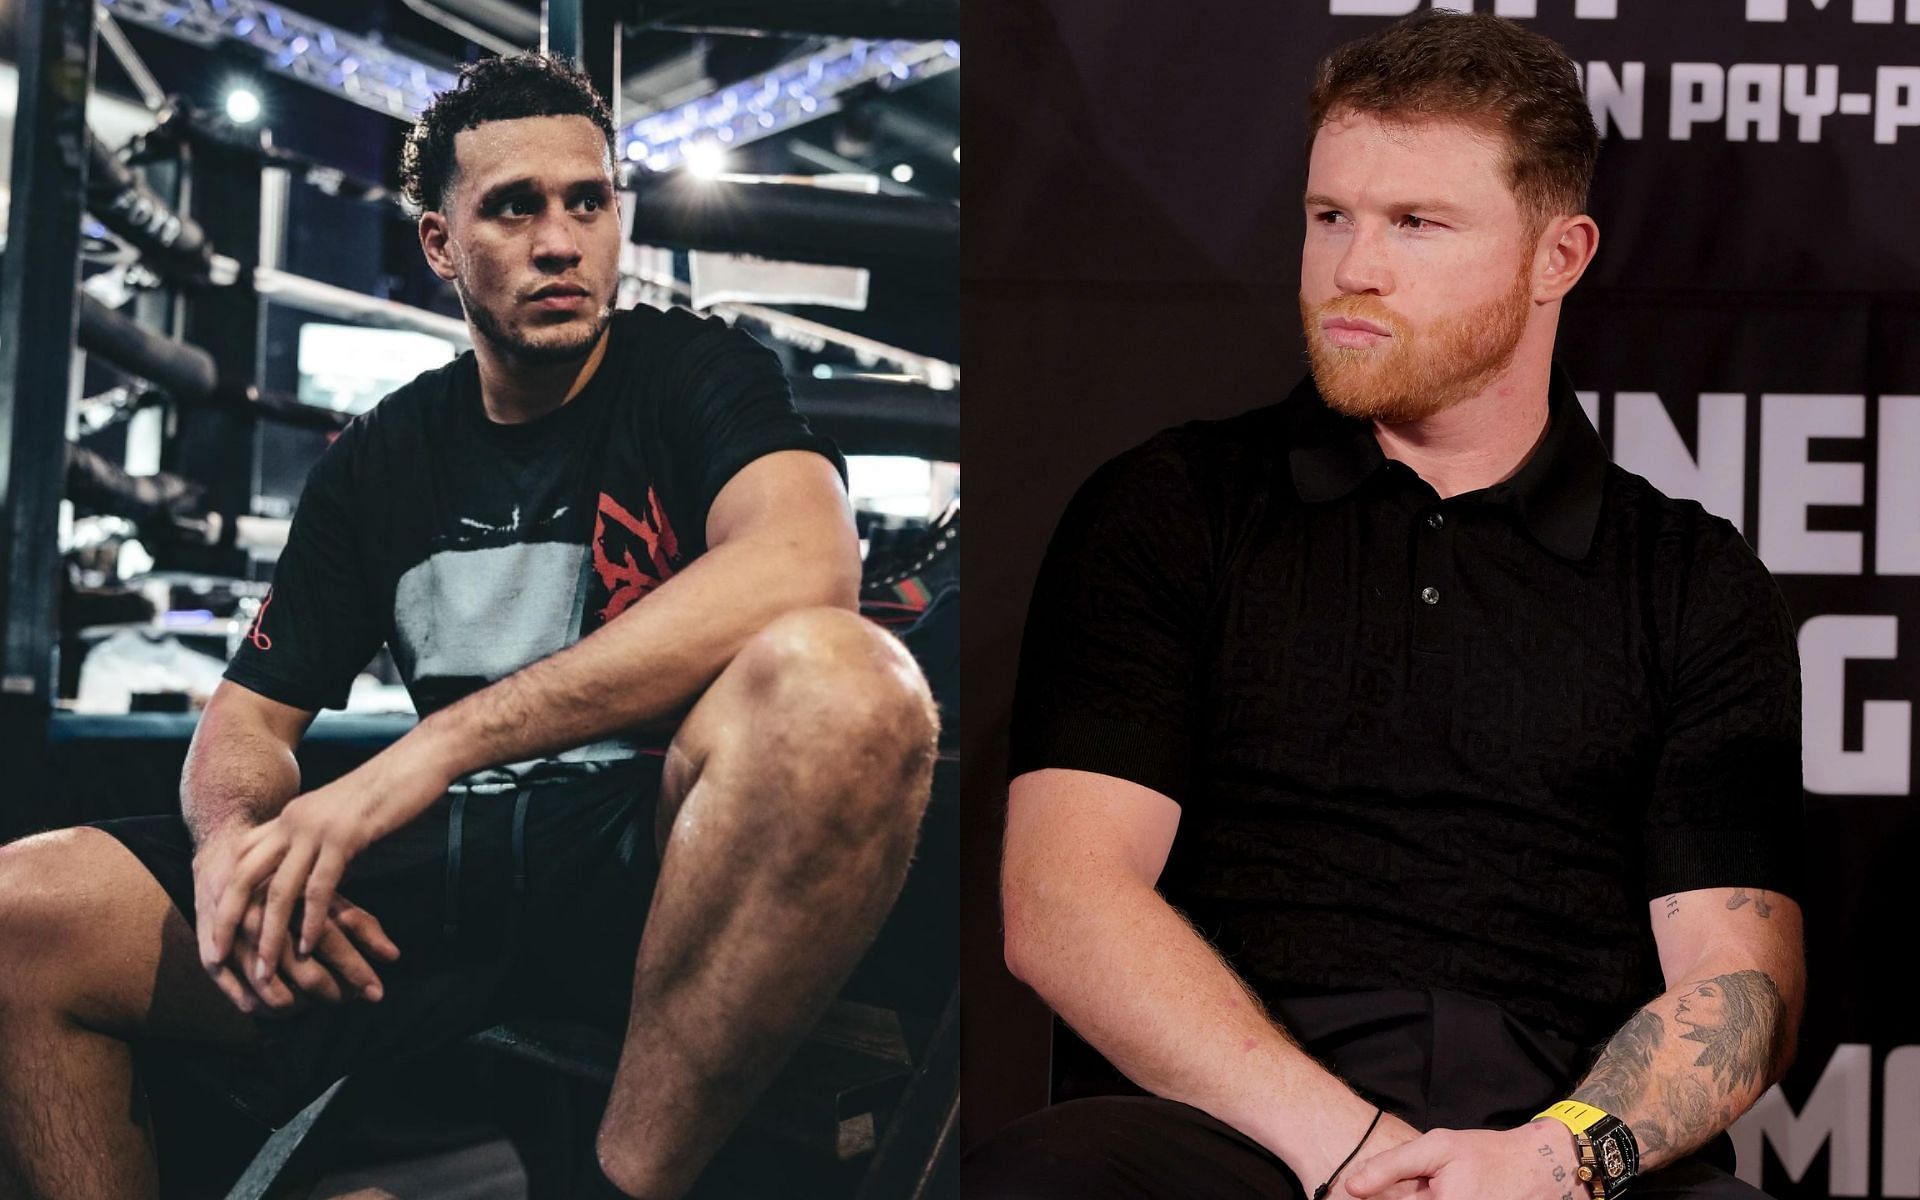 David Benavidez (left) blasts Canelo Alvarez (right) for running from a fight with him [Images Courtesy: @GettyImages, @benavidez300 on Instagram]